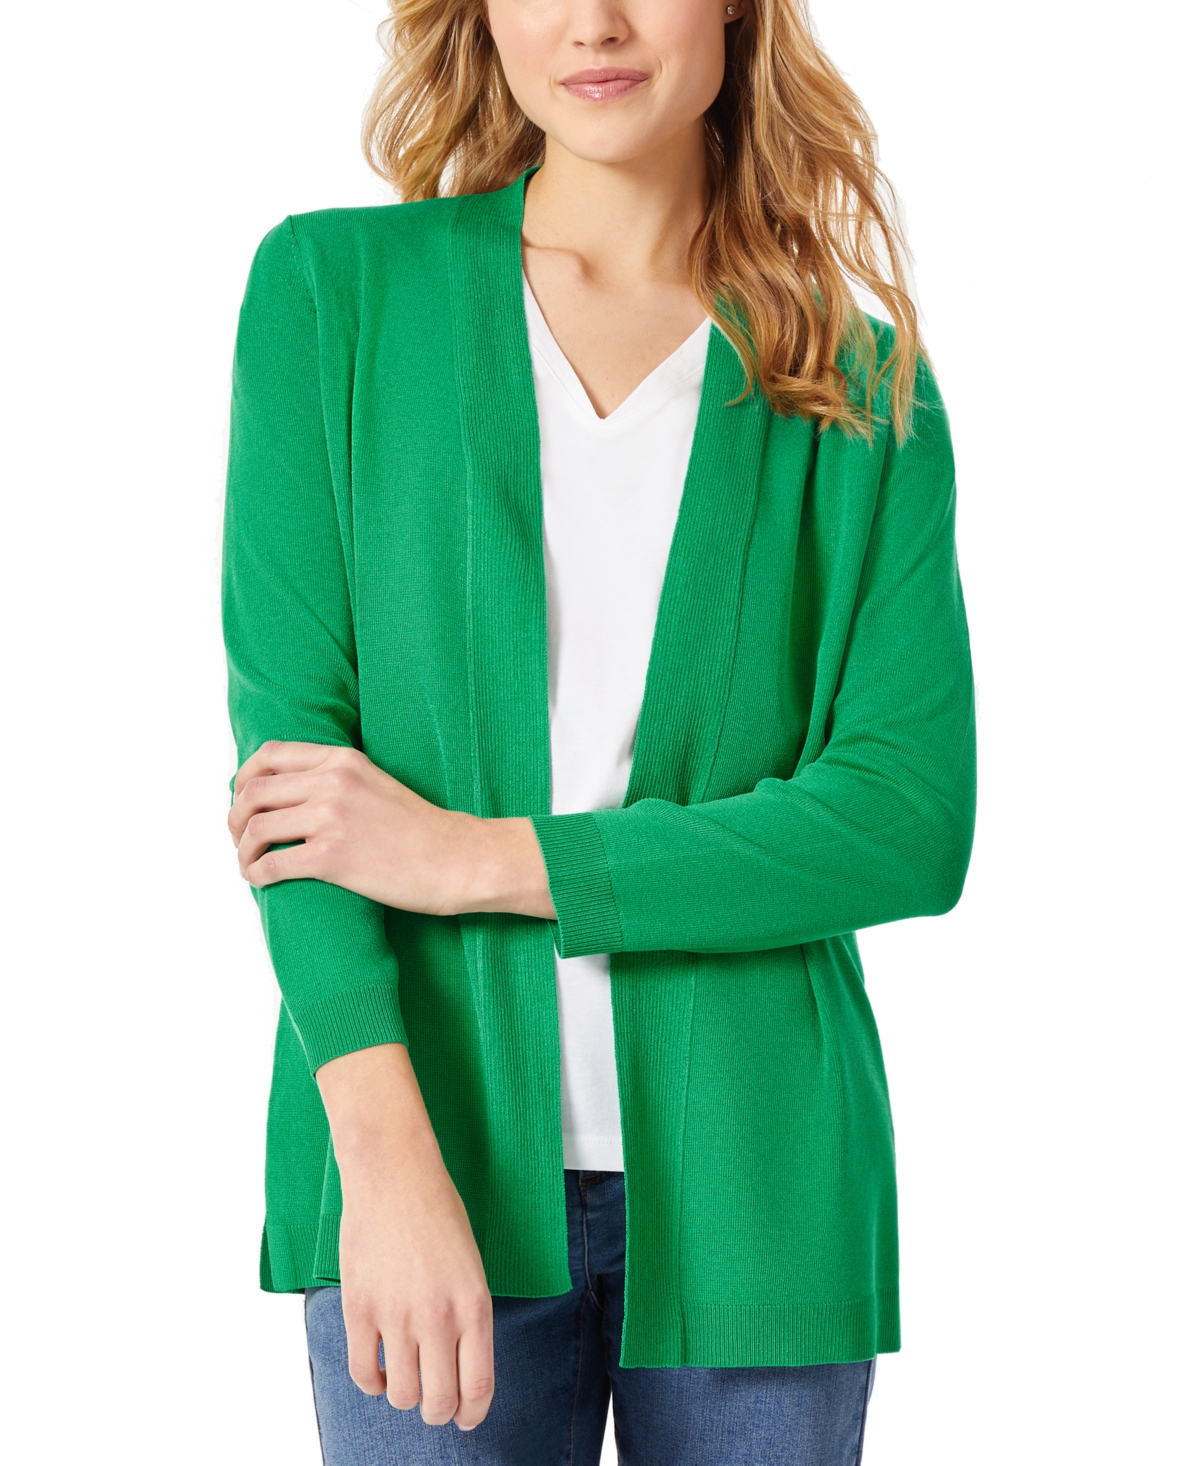 Women's Relaxed V-Neck Open Cardigan - Kelly Green